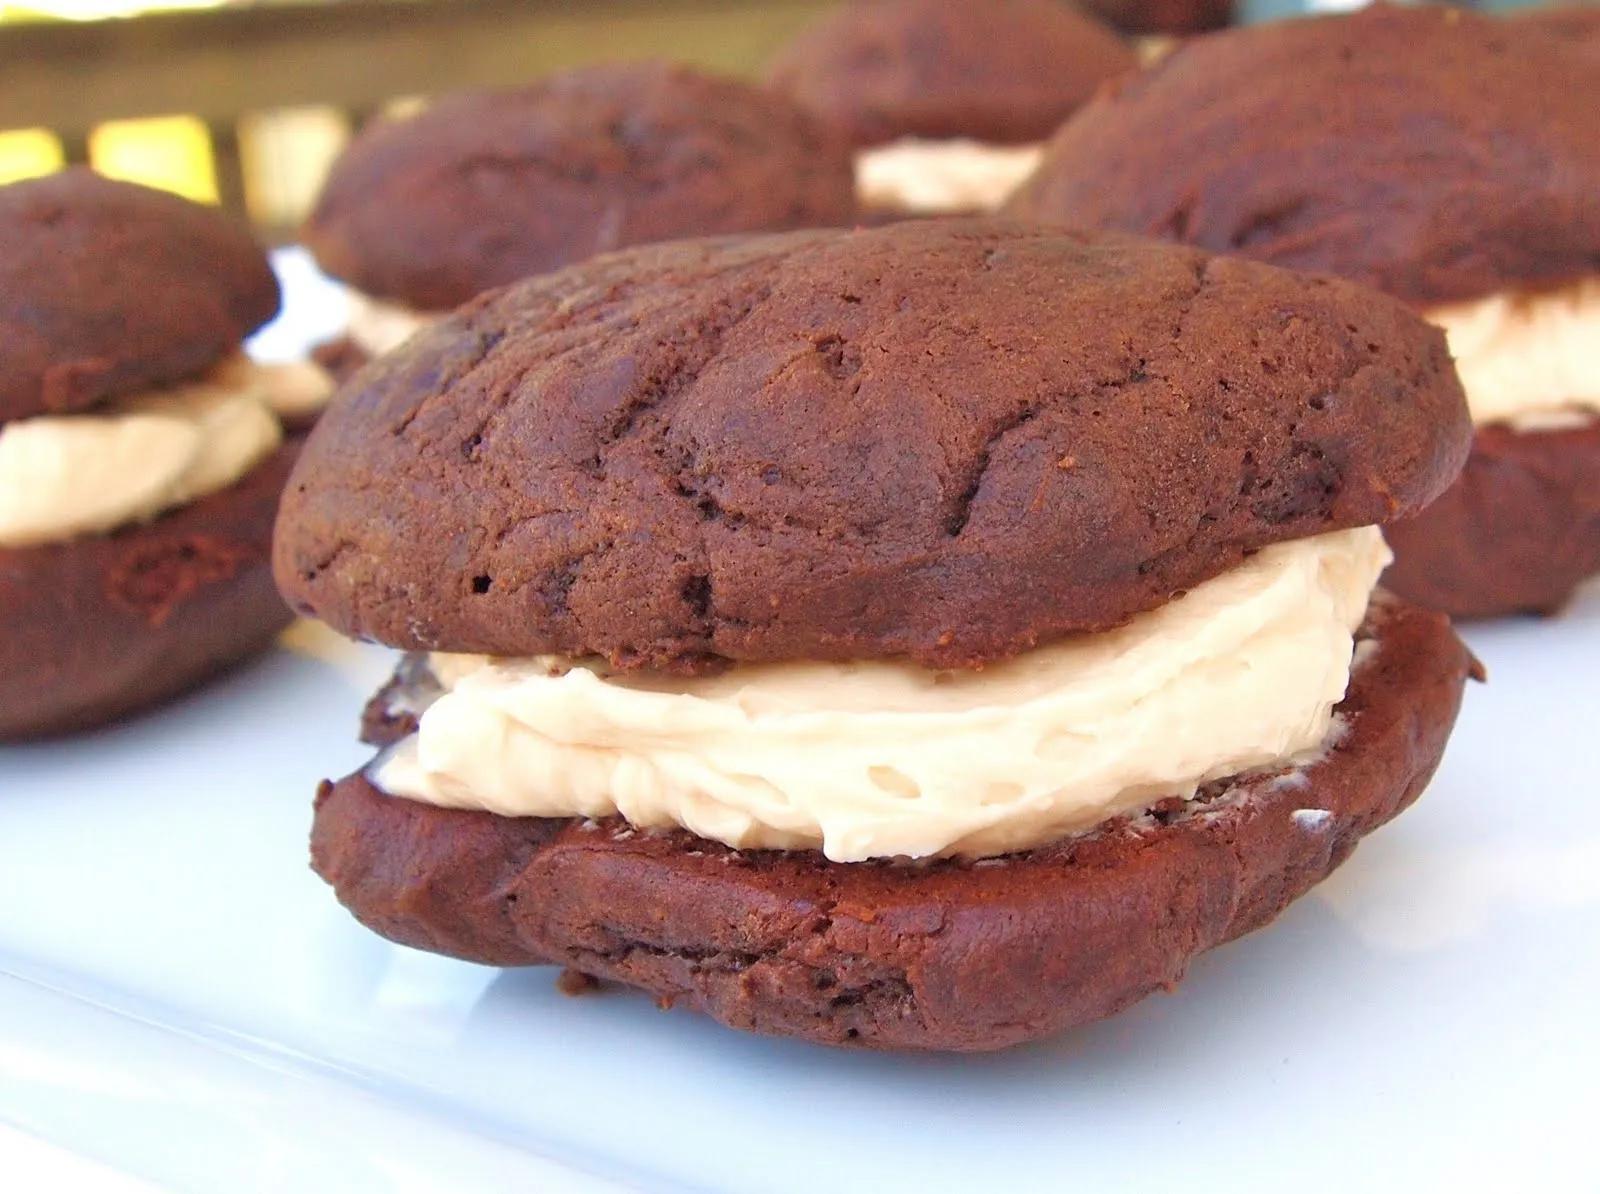 The Alchemist: Chocolate Whoopie Pies With Salted Caramel Buttercream